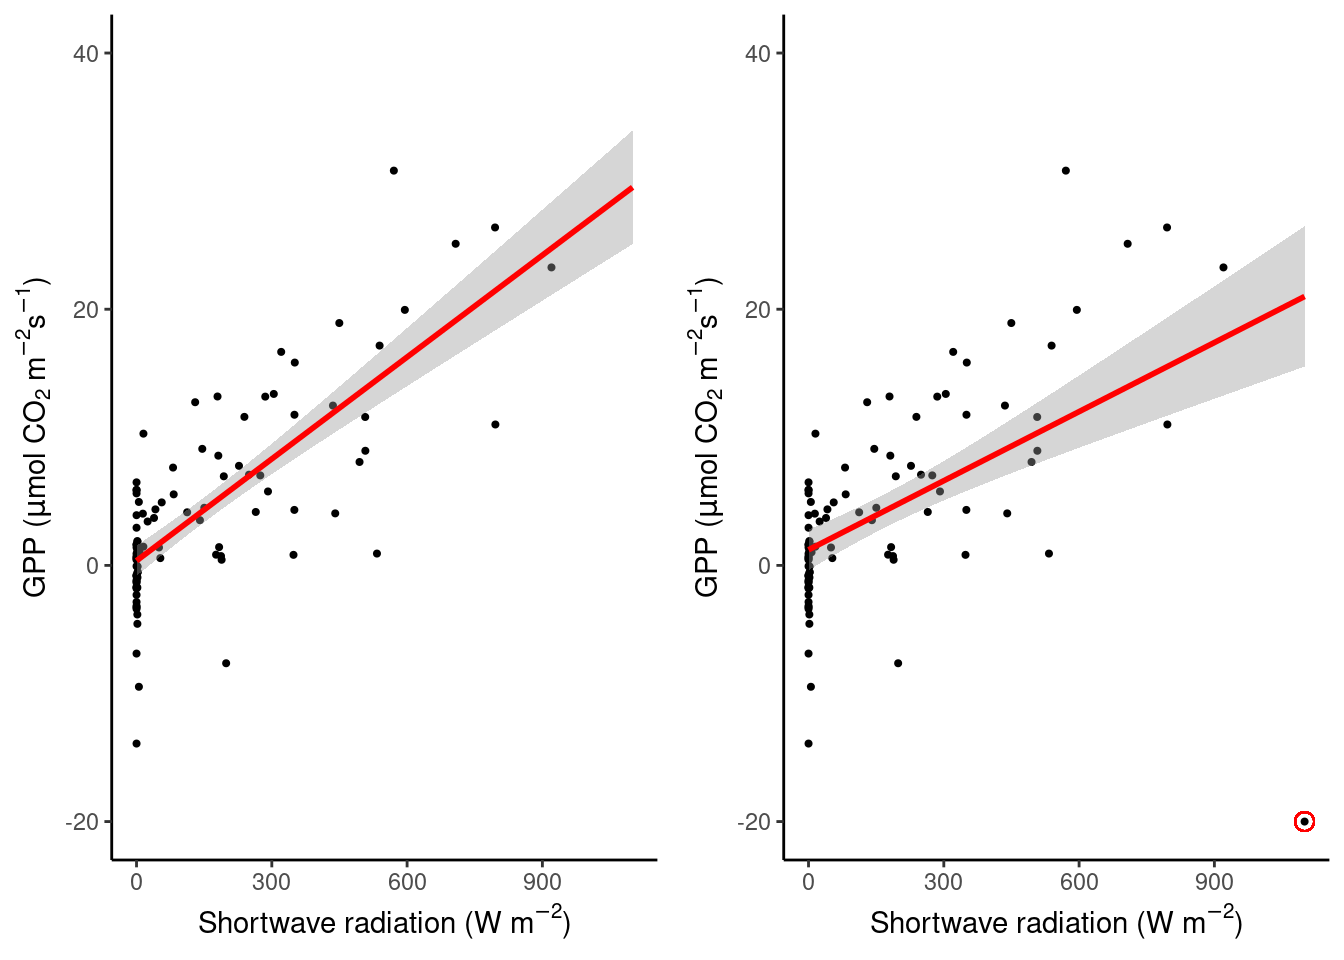 The influence of an outlier on a regression fit.